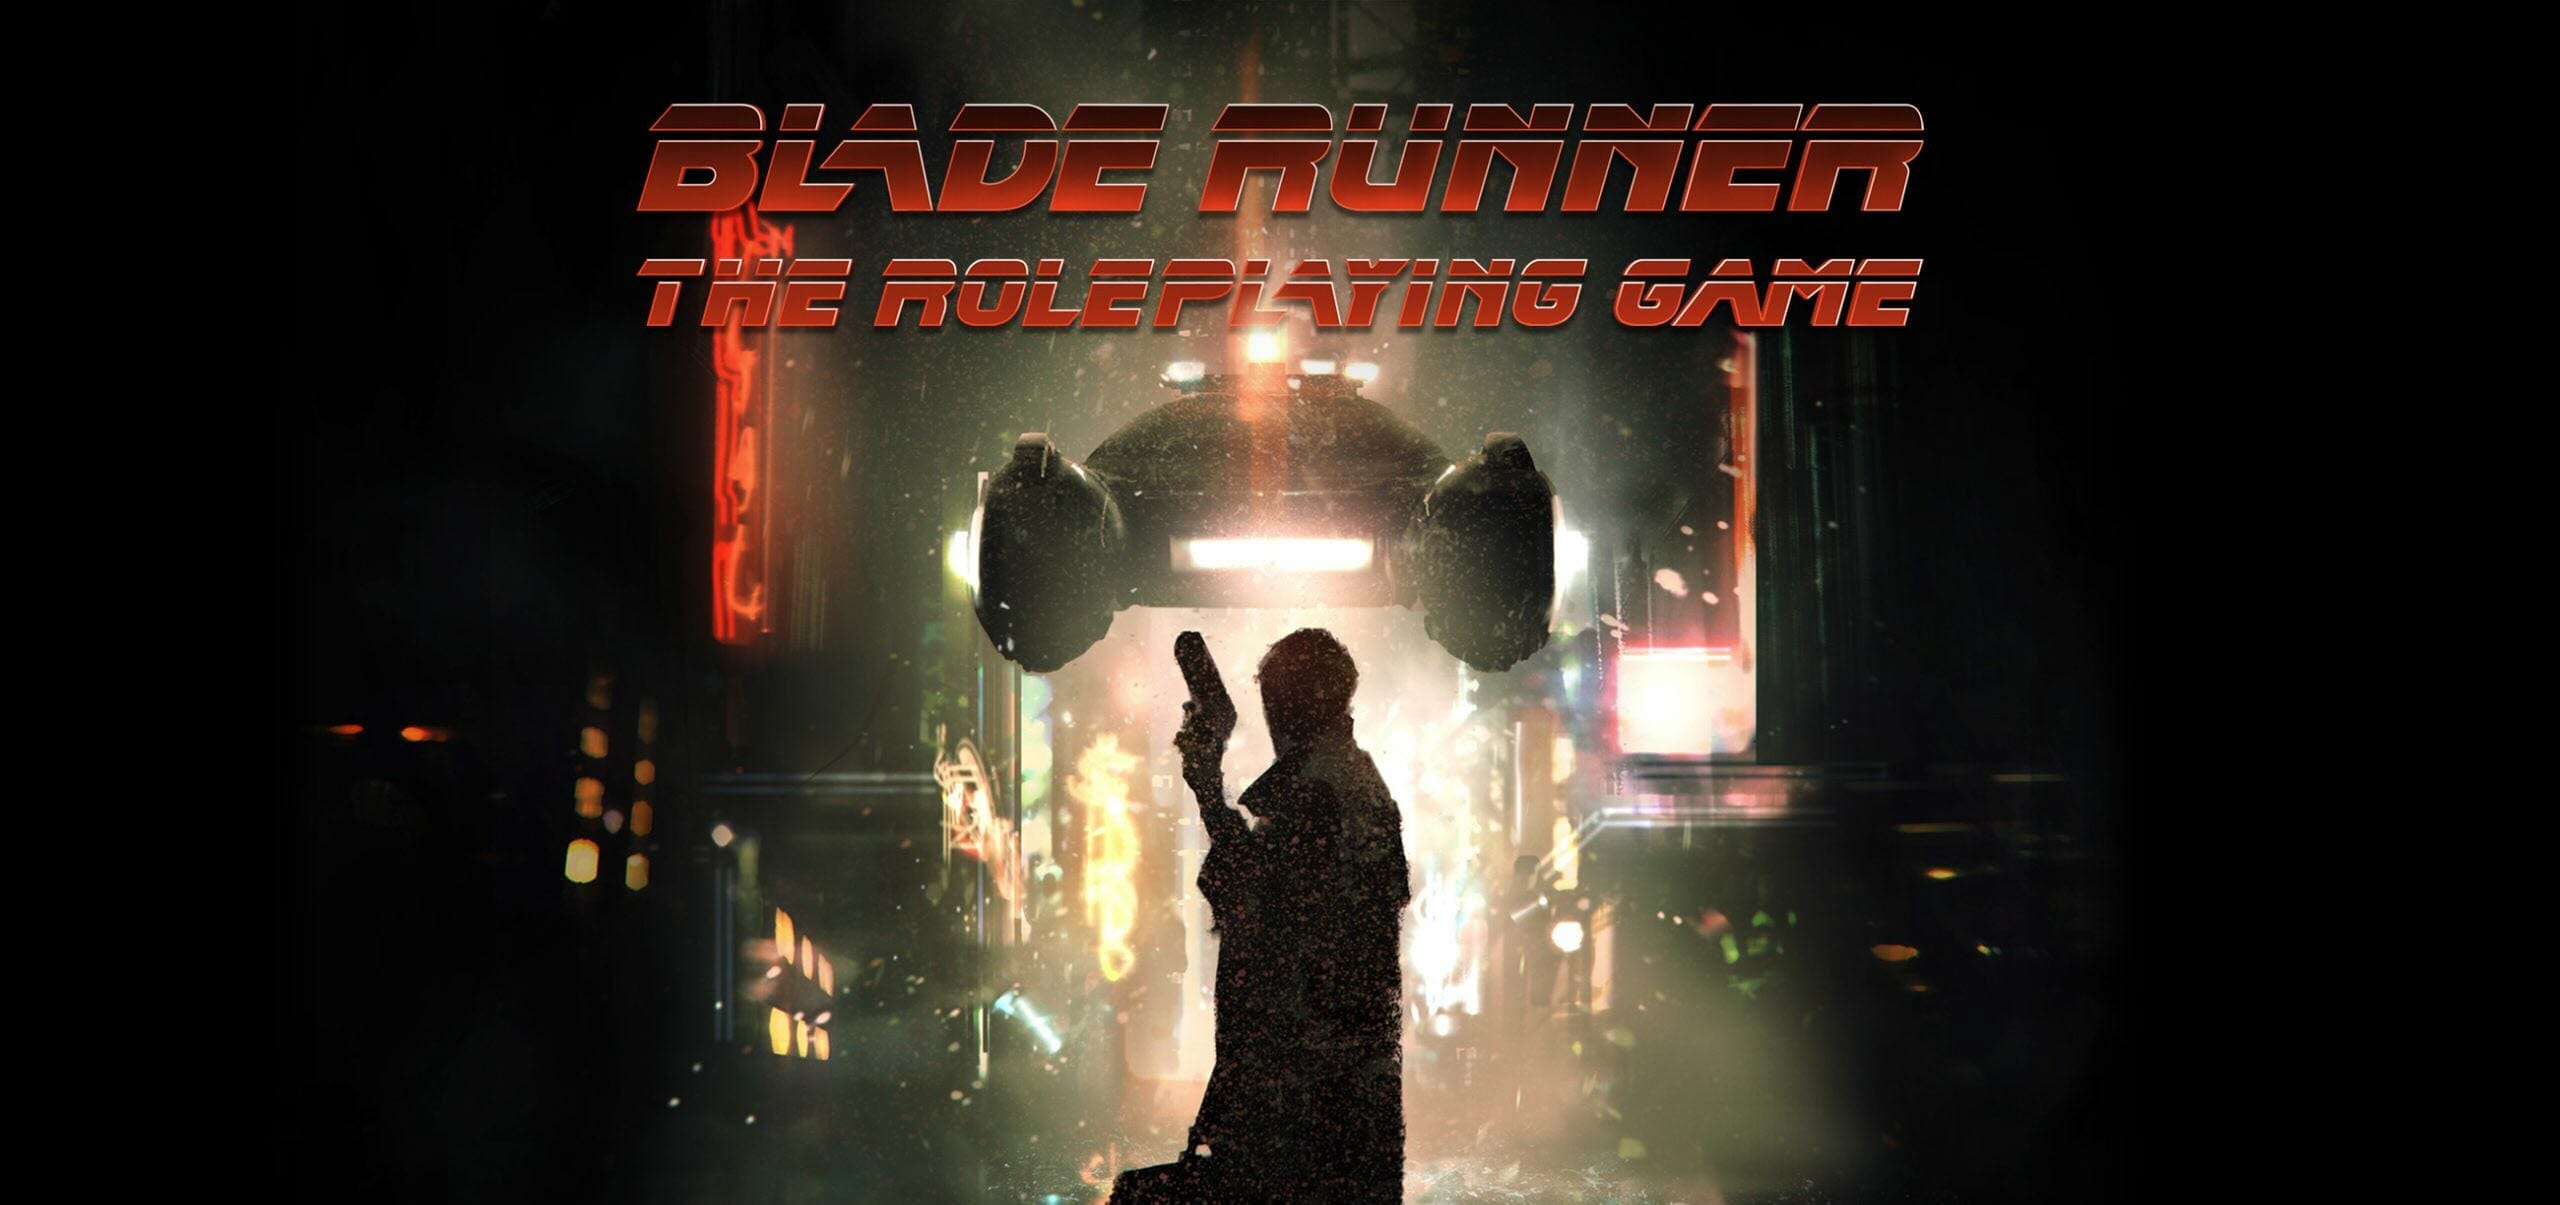 Blade Runner RPG coming from Free League